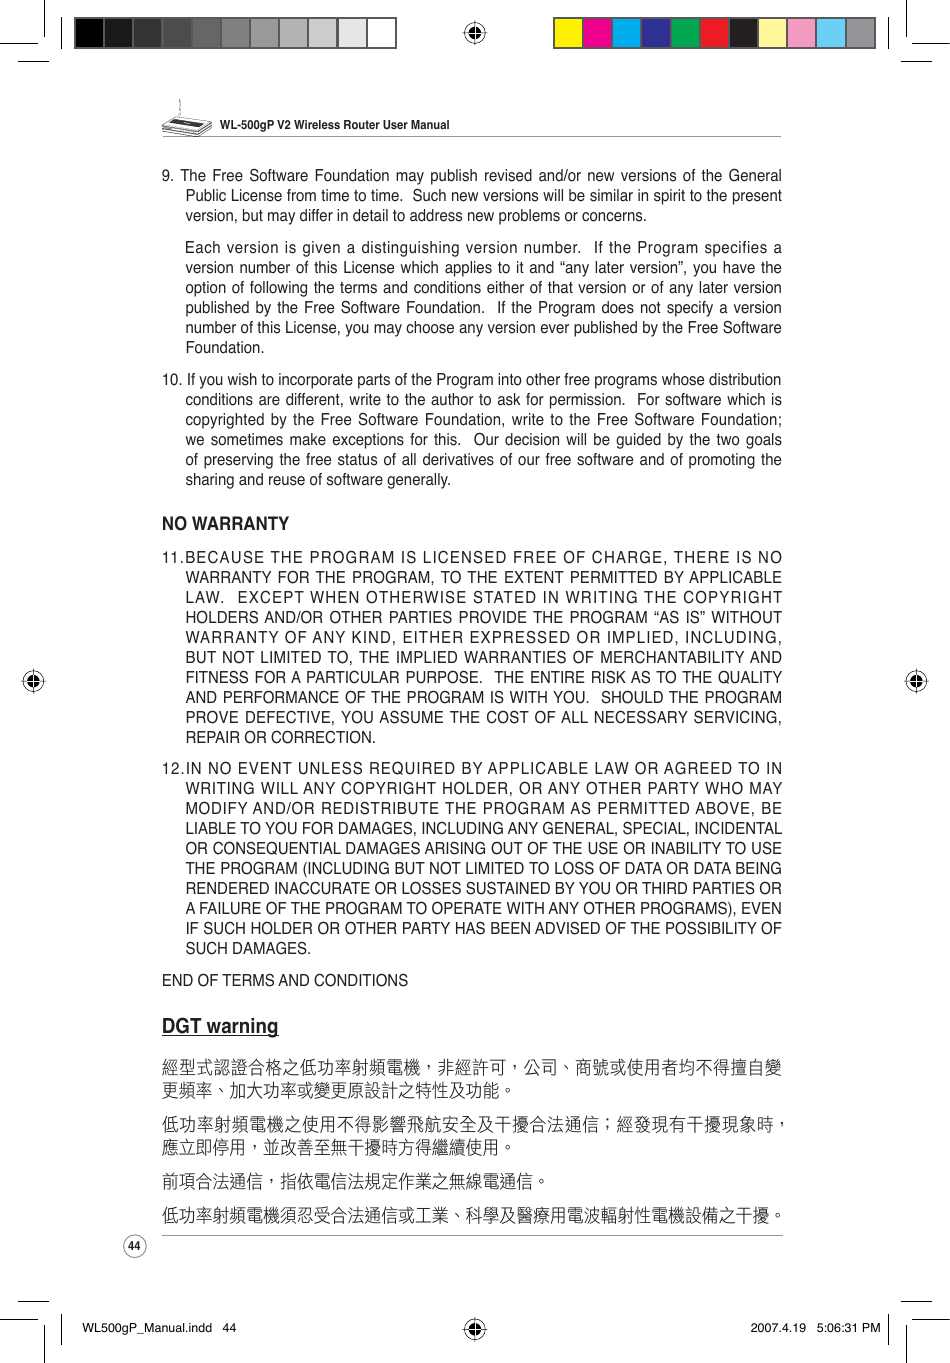 WL-500gP V2 Wireless Router User Manual449. The Free Software Foundation may publish revised and/or new versions of the General Public License from time to time.  Such new versions will be similar in spirit to the present version, but may differ in detail to address new problems or concerns.Each version is given a distinguishing version number.  If the Program specifies a version number of this License which applies to it and “any later version”, you have the option of following the terms and conditions either of that version or of any later version published by the Free Software Foundation.  If the Program does not specify a version number of this License, you may choose any version ever published by the Free Software Foundation.10. If you wish to incorporate parts of the Program into other free programs whose distribution conditions are different, write to the author to ask for permission.  For software which is copyrighted by the Free Software Foundation, write to the Free Software Foundation; we sometimes make exceptions for this.  Our decision will be guided by the two goals of preserving the free status of all derivatives of our free software and of promoting the sharing and reuse of software generally.NO WARRANTY11.BECAUSE THE PROGRAM IS LICENSED FREE OF CHARGE, THERE IS NO WARRANTY FOR THE PROGRAM, TO THE EXTENT PERMITTED BY APPLICABLE LAW.  EXCEPT WHEN OTHERWISE STATED IN WRITING THE COPYRIGHT HOLDERS AND/OR OTHER PARTIES PROVIDE THE PROGRAM “AS IS” WITHOUT WARRANTY OF ANY KIND, EITHER EXPRESSED OR IMPLIED, INCLUDING, BUT NOT LIMITED TO, THE IMPLIED WARRANTIES OF MERCHANTABILITY AND FITNESS FOR A PARTICULAR PURPOSE.  THE ENTIRE RISK AS TO THE QUALITY AND PERFORMANCE OF THE PROGRAM IS WITH YOU.  SHOULD THE PROGRAM PROVE DEFECTIVE, YOU ASSUME THE COST OF ALL NECESSARY SERVICING, REPAIR OR CORRECTION.12.IN NO EVENT UNLESS REQUIRED BY APPLICABLE LAW OR AGREED TO IN WRITING WILL ANY COPYRIGHT HOLDER, OR ANY OTHER PARTY WHO MAY MODIFY AND/OR REDISTRIBUTE THE PROGRAM AS PERMITTED ABOVE, BE LIABLE TO YOU FOR DAMAGES, INCLUDING ANY GENERAL, SPECIAL, INCIDENTAL OR CONSEQUENTIAL DAMAGES ARISING OUT OF THE USE OR INABILITY TO USE THE PROGRAM (INCLUDING BUT NOT LIMITED TO LOSS OF DATA OR DATA BEING RENDERED INACCURATE OR LOSSES SUSTAINED BY YOU OR THIRD PARTIES OR A FAILURE OF THE PROGRAM TO OPERATE WITH ANY OTHER PROGRAMS), EVEN IF SUCH HOLDER OR OTHER PARTY HAS BEEN ADVISED OF THE POSSIBILITY OF SUCH DAMAGES.END OF TERMS AND CONDITIONSDGT warning經型式認證合格之低功率射頻電機，非經許可，公司、商號或使用者均不得擅自變更頻率、加大功率或變更原設計之特性及功能。低功率射頻電機之使用不得影響飛航安全及干擾合法通信；經發現有干擾現象時，應立即停用，並改善至無干擾時方得繼續使用。前項合法通信，指依電信法規定作業之無線電通信。低功率射頻電機須忍受合法通信或工業、科學及醫療用電波輻射性電機設備之干擾。WL500gP_Manual.indd   44 2007.4.19   5:06:31 PM